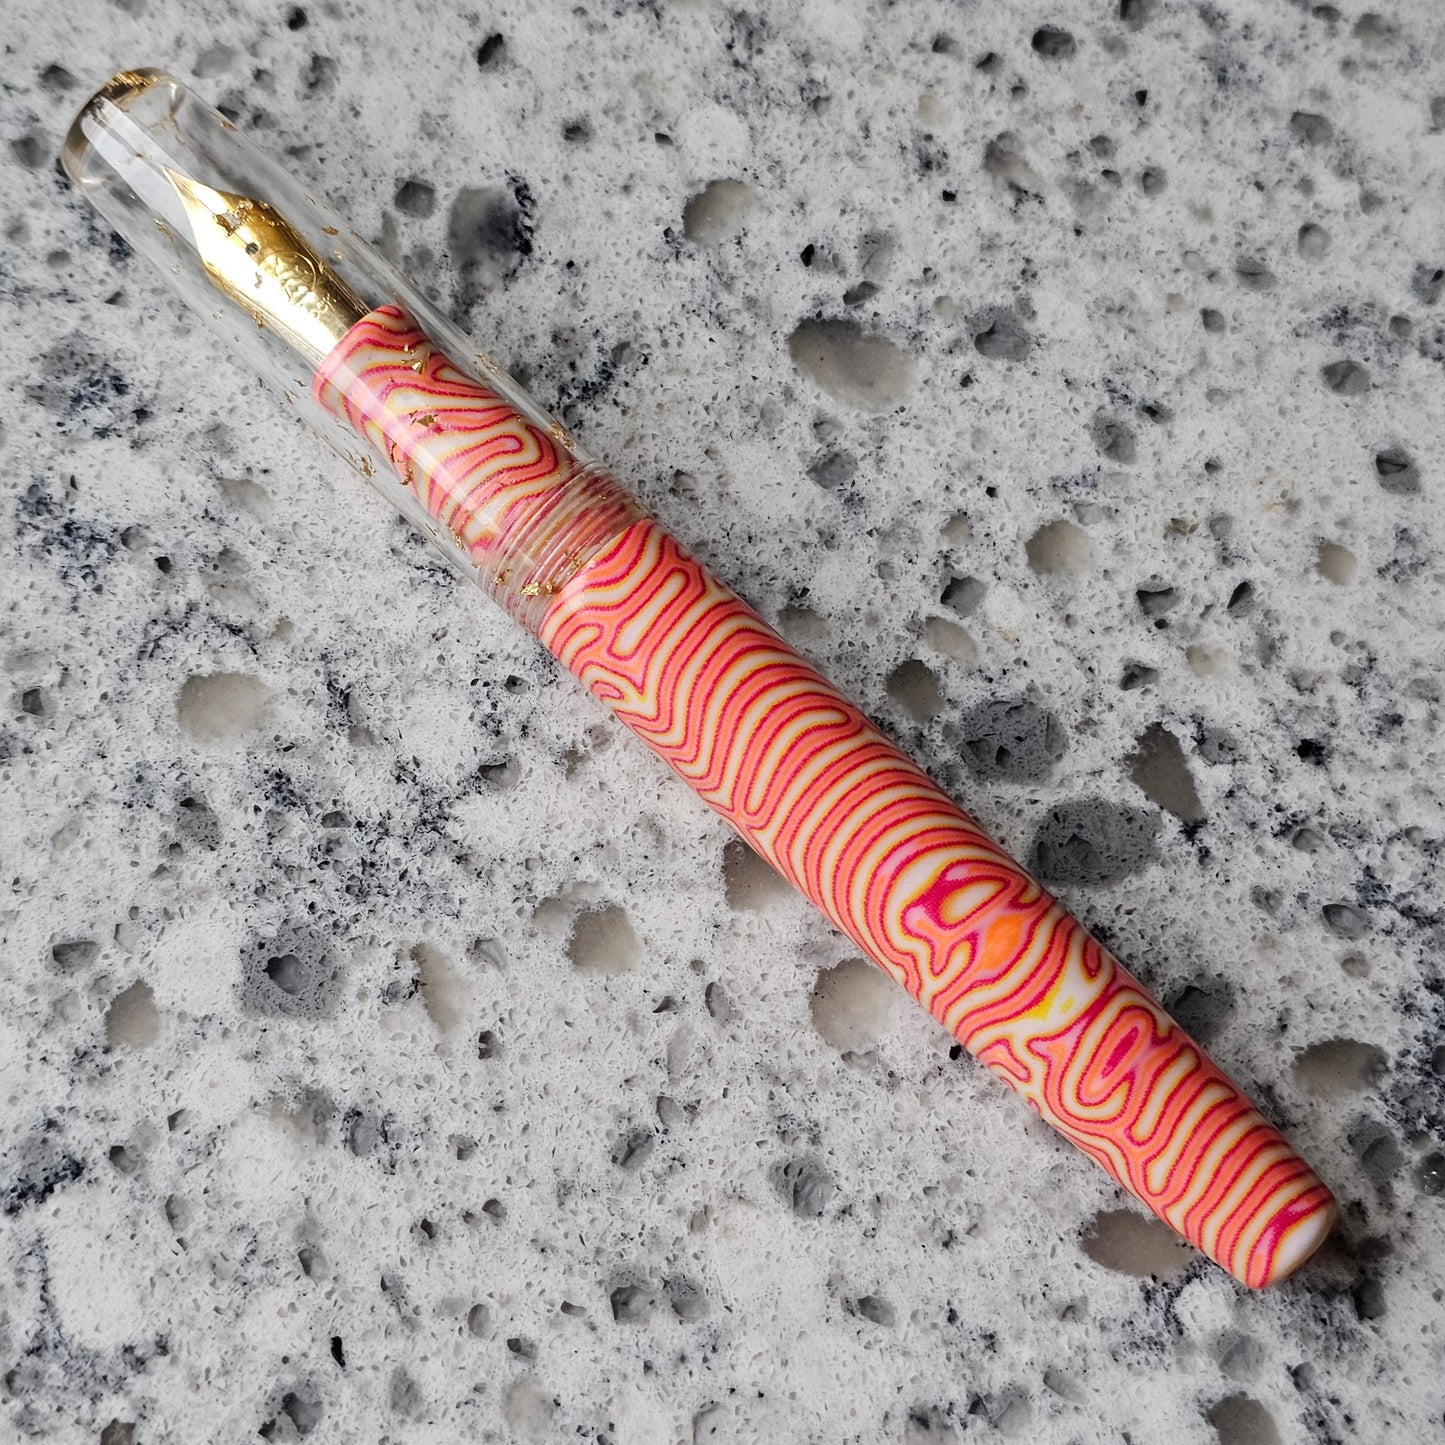 Crazy Fiber Fountain with Gold Flake Demonstrator Cap